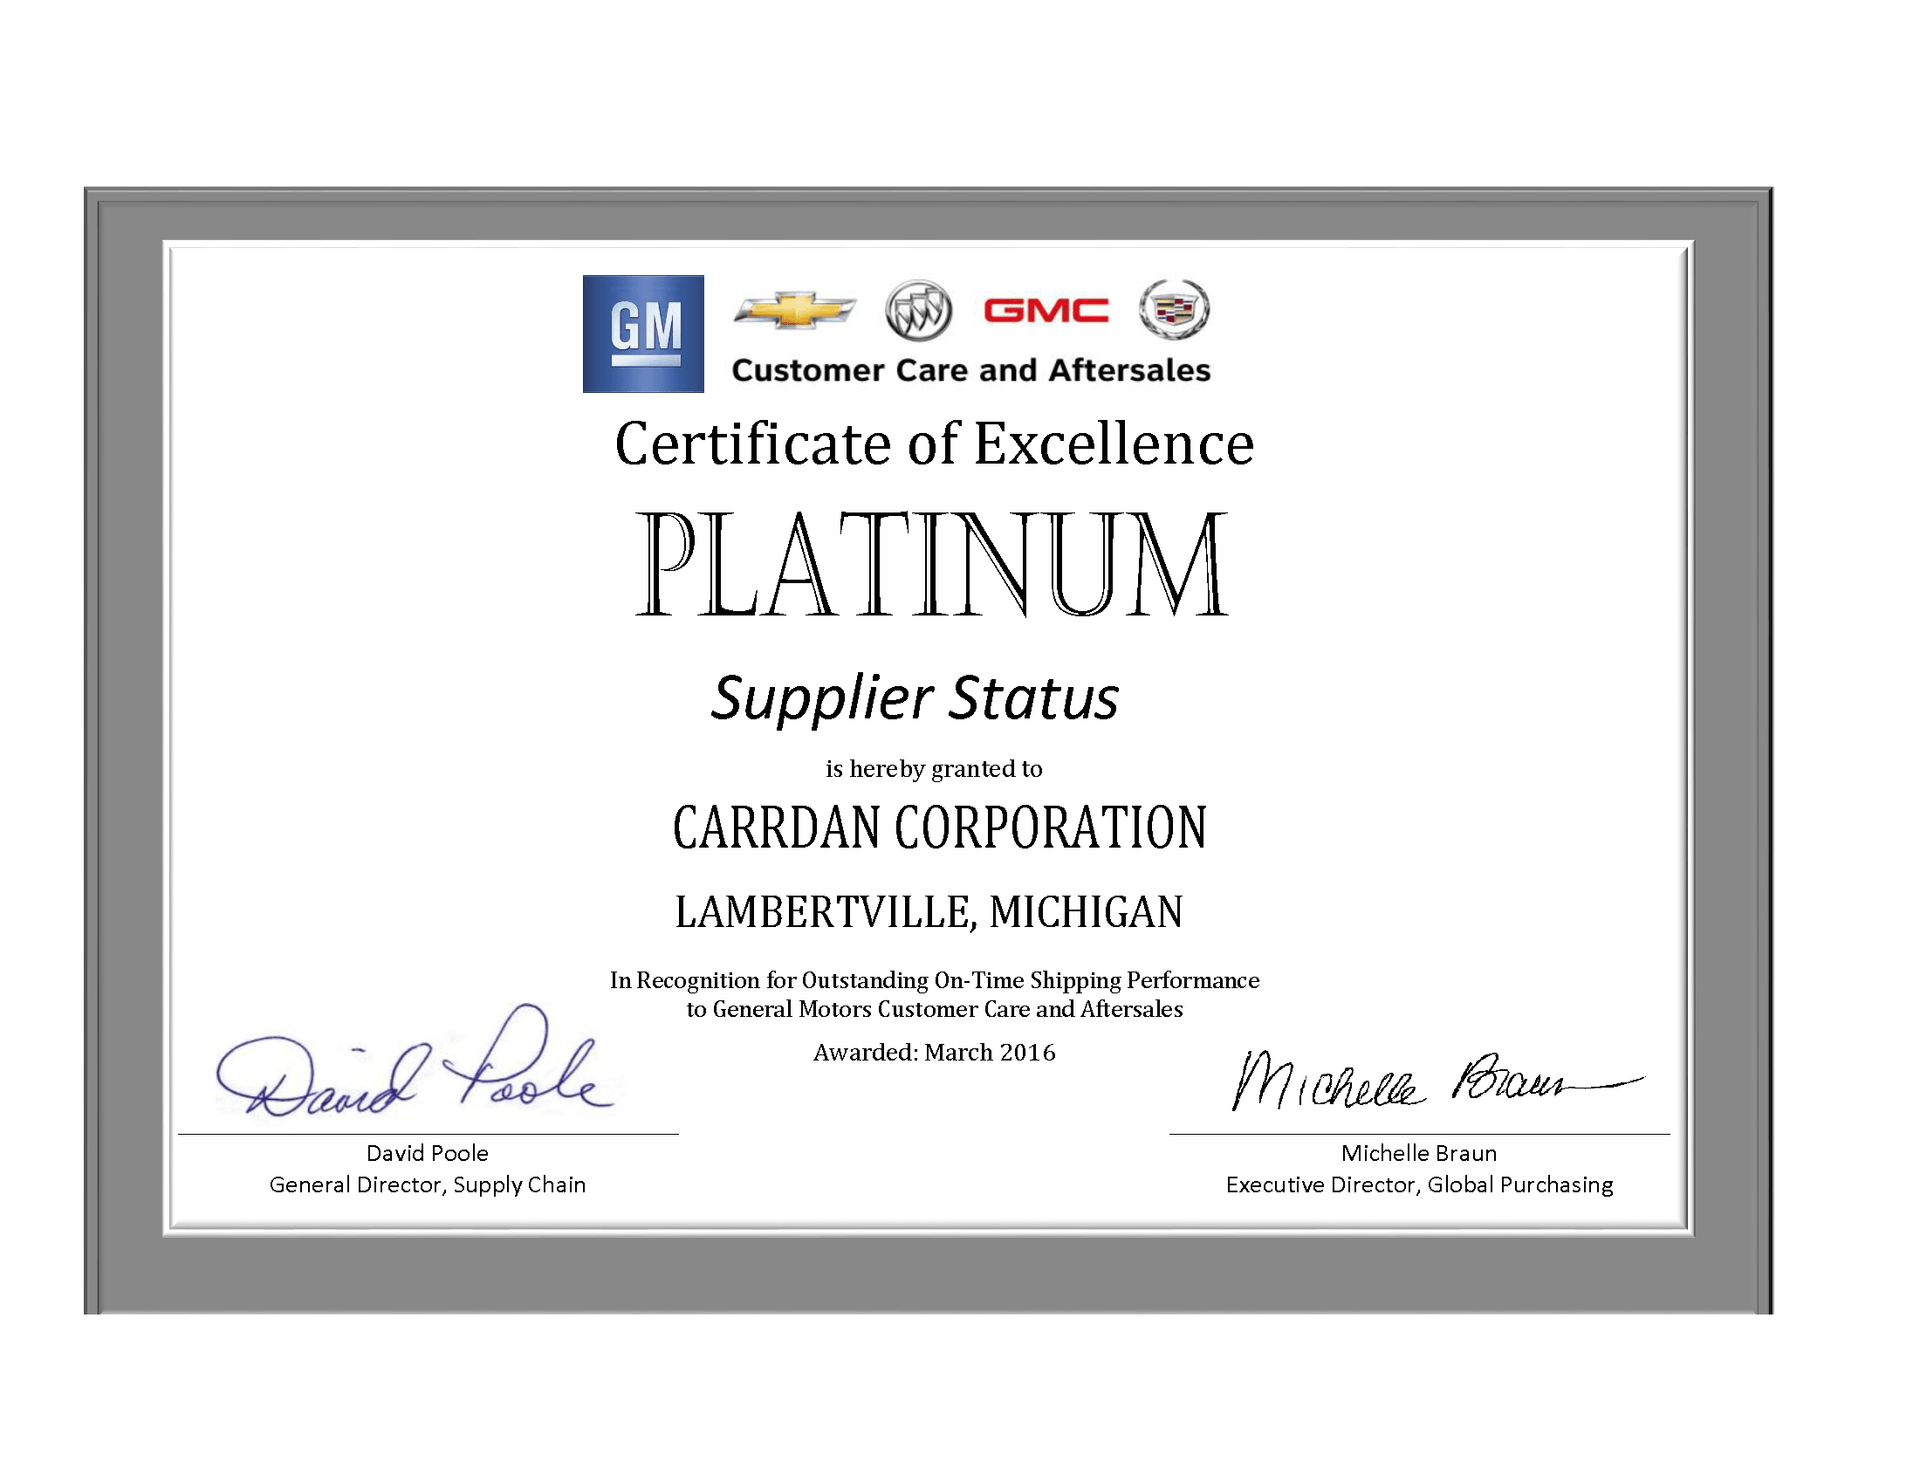 2015 Certificate of Excellence - Carrdan Corporation